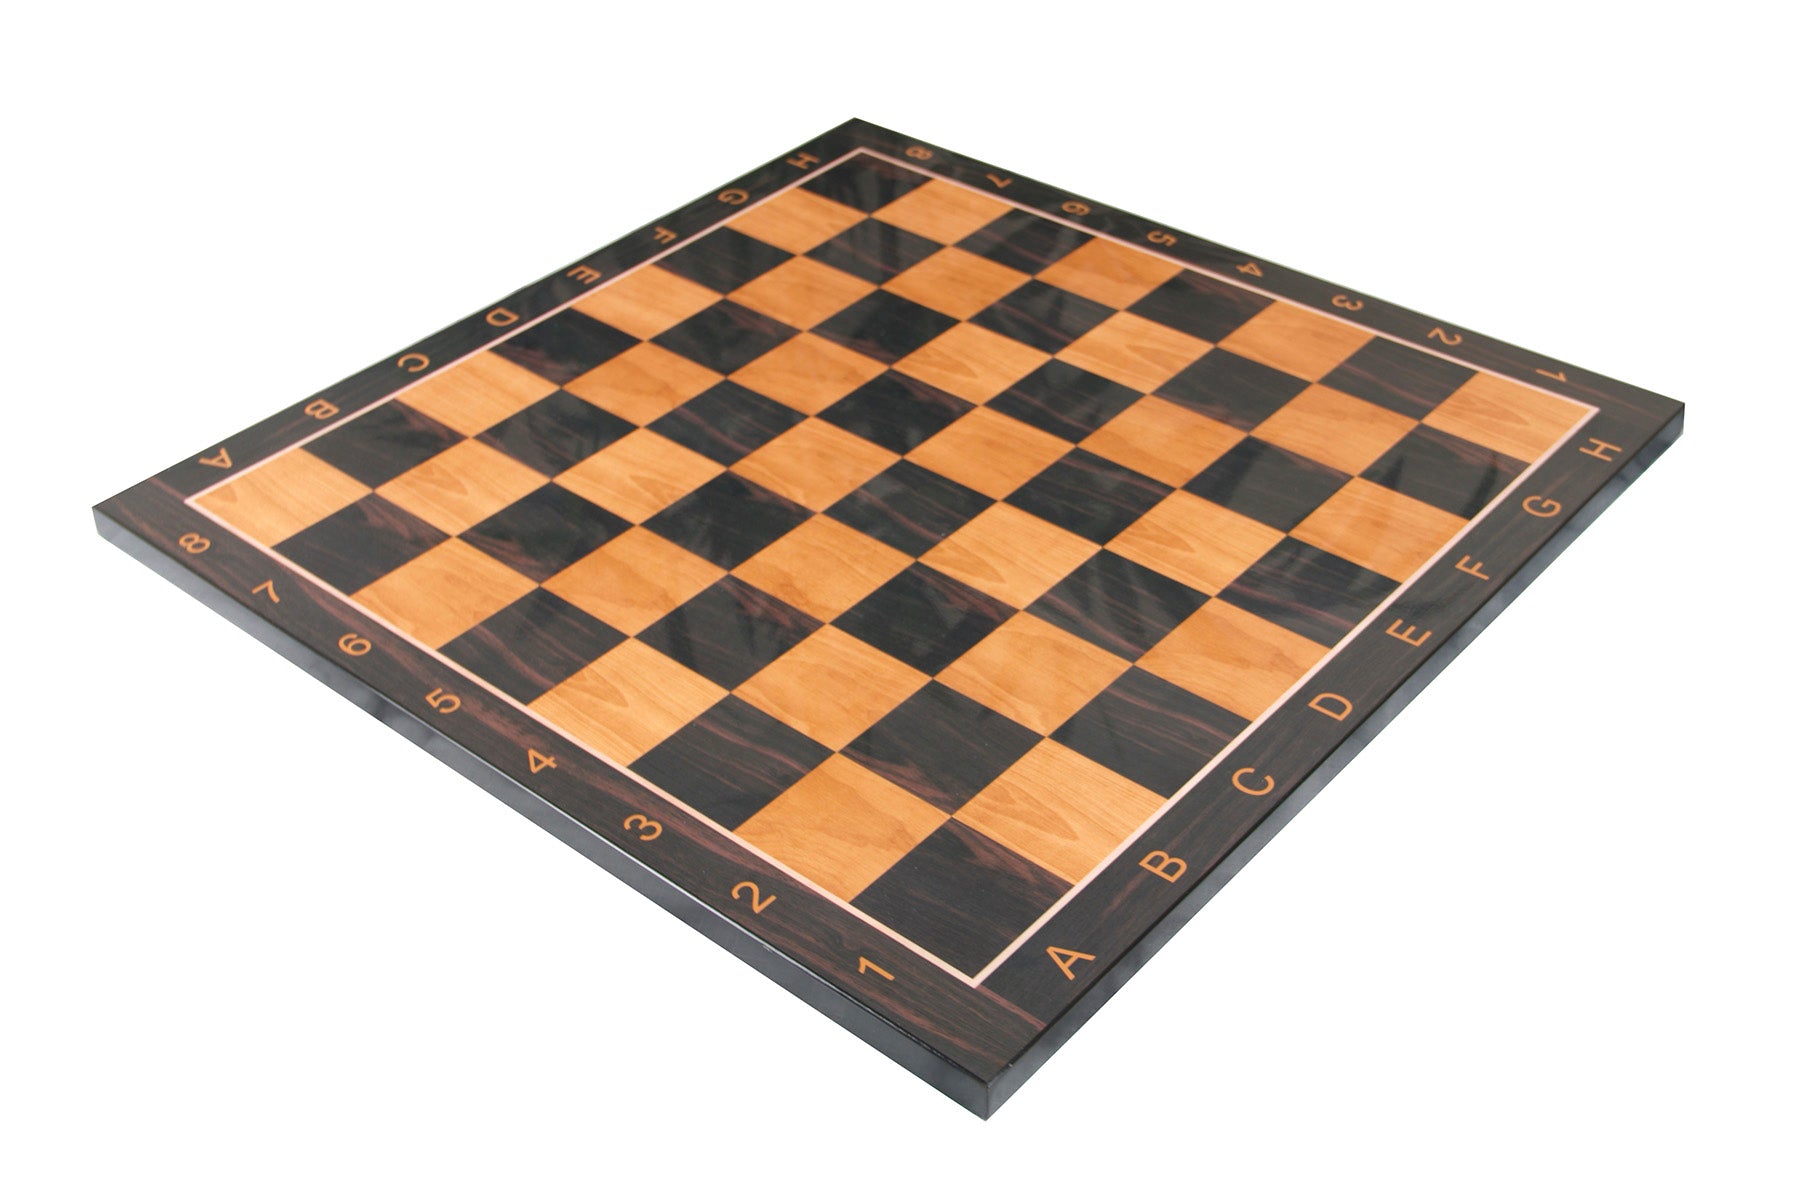 Chess Board with 2" Square size in Ebony/Antiqued Box wood Look with Notations